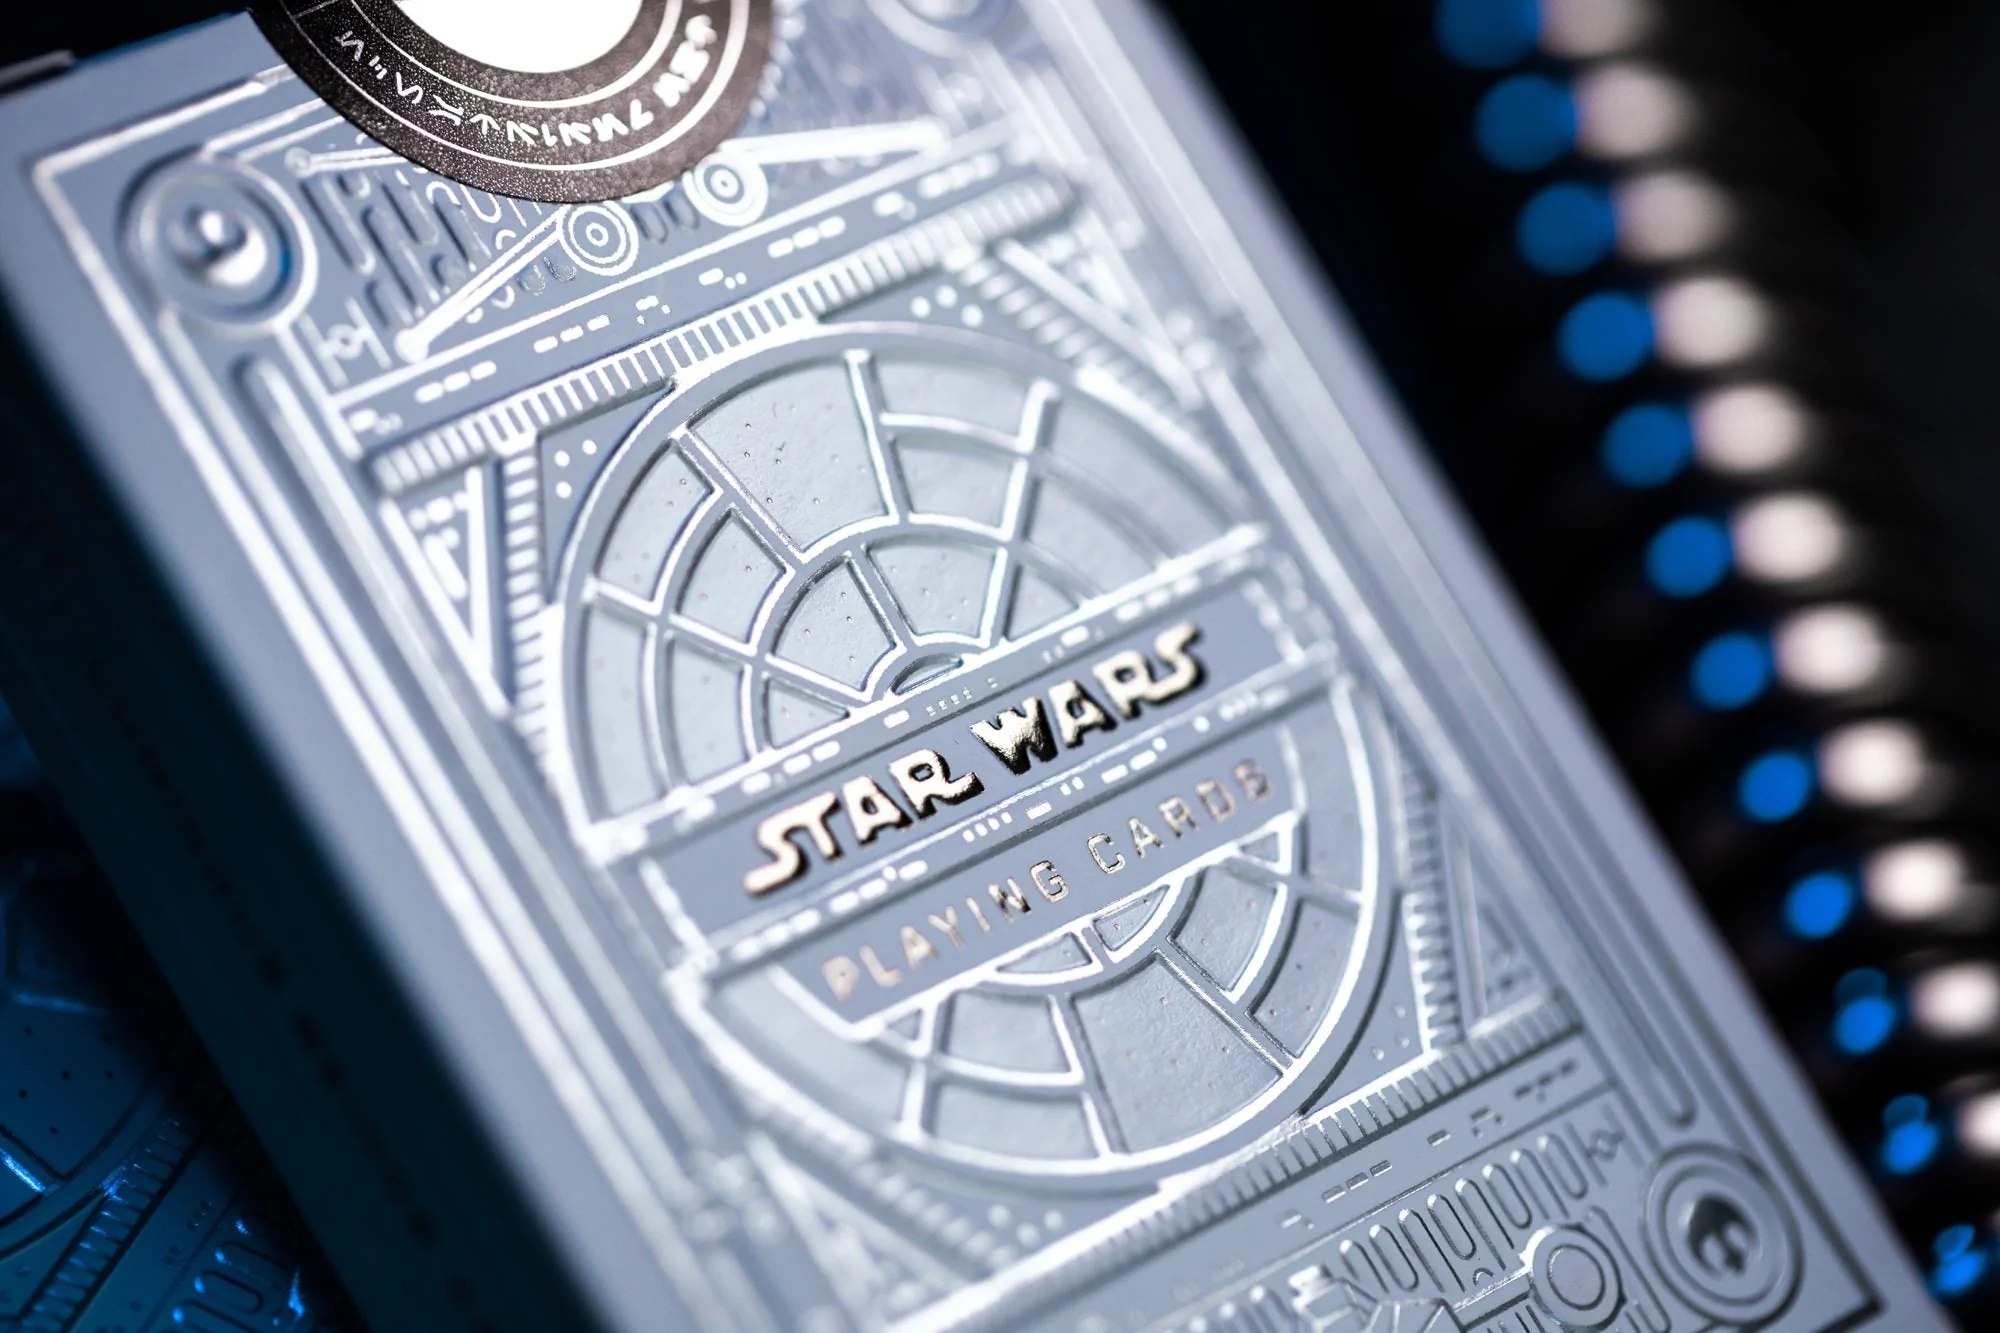 Theory11 Star Wars Silver on White Playing Cards